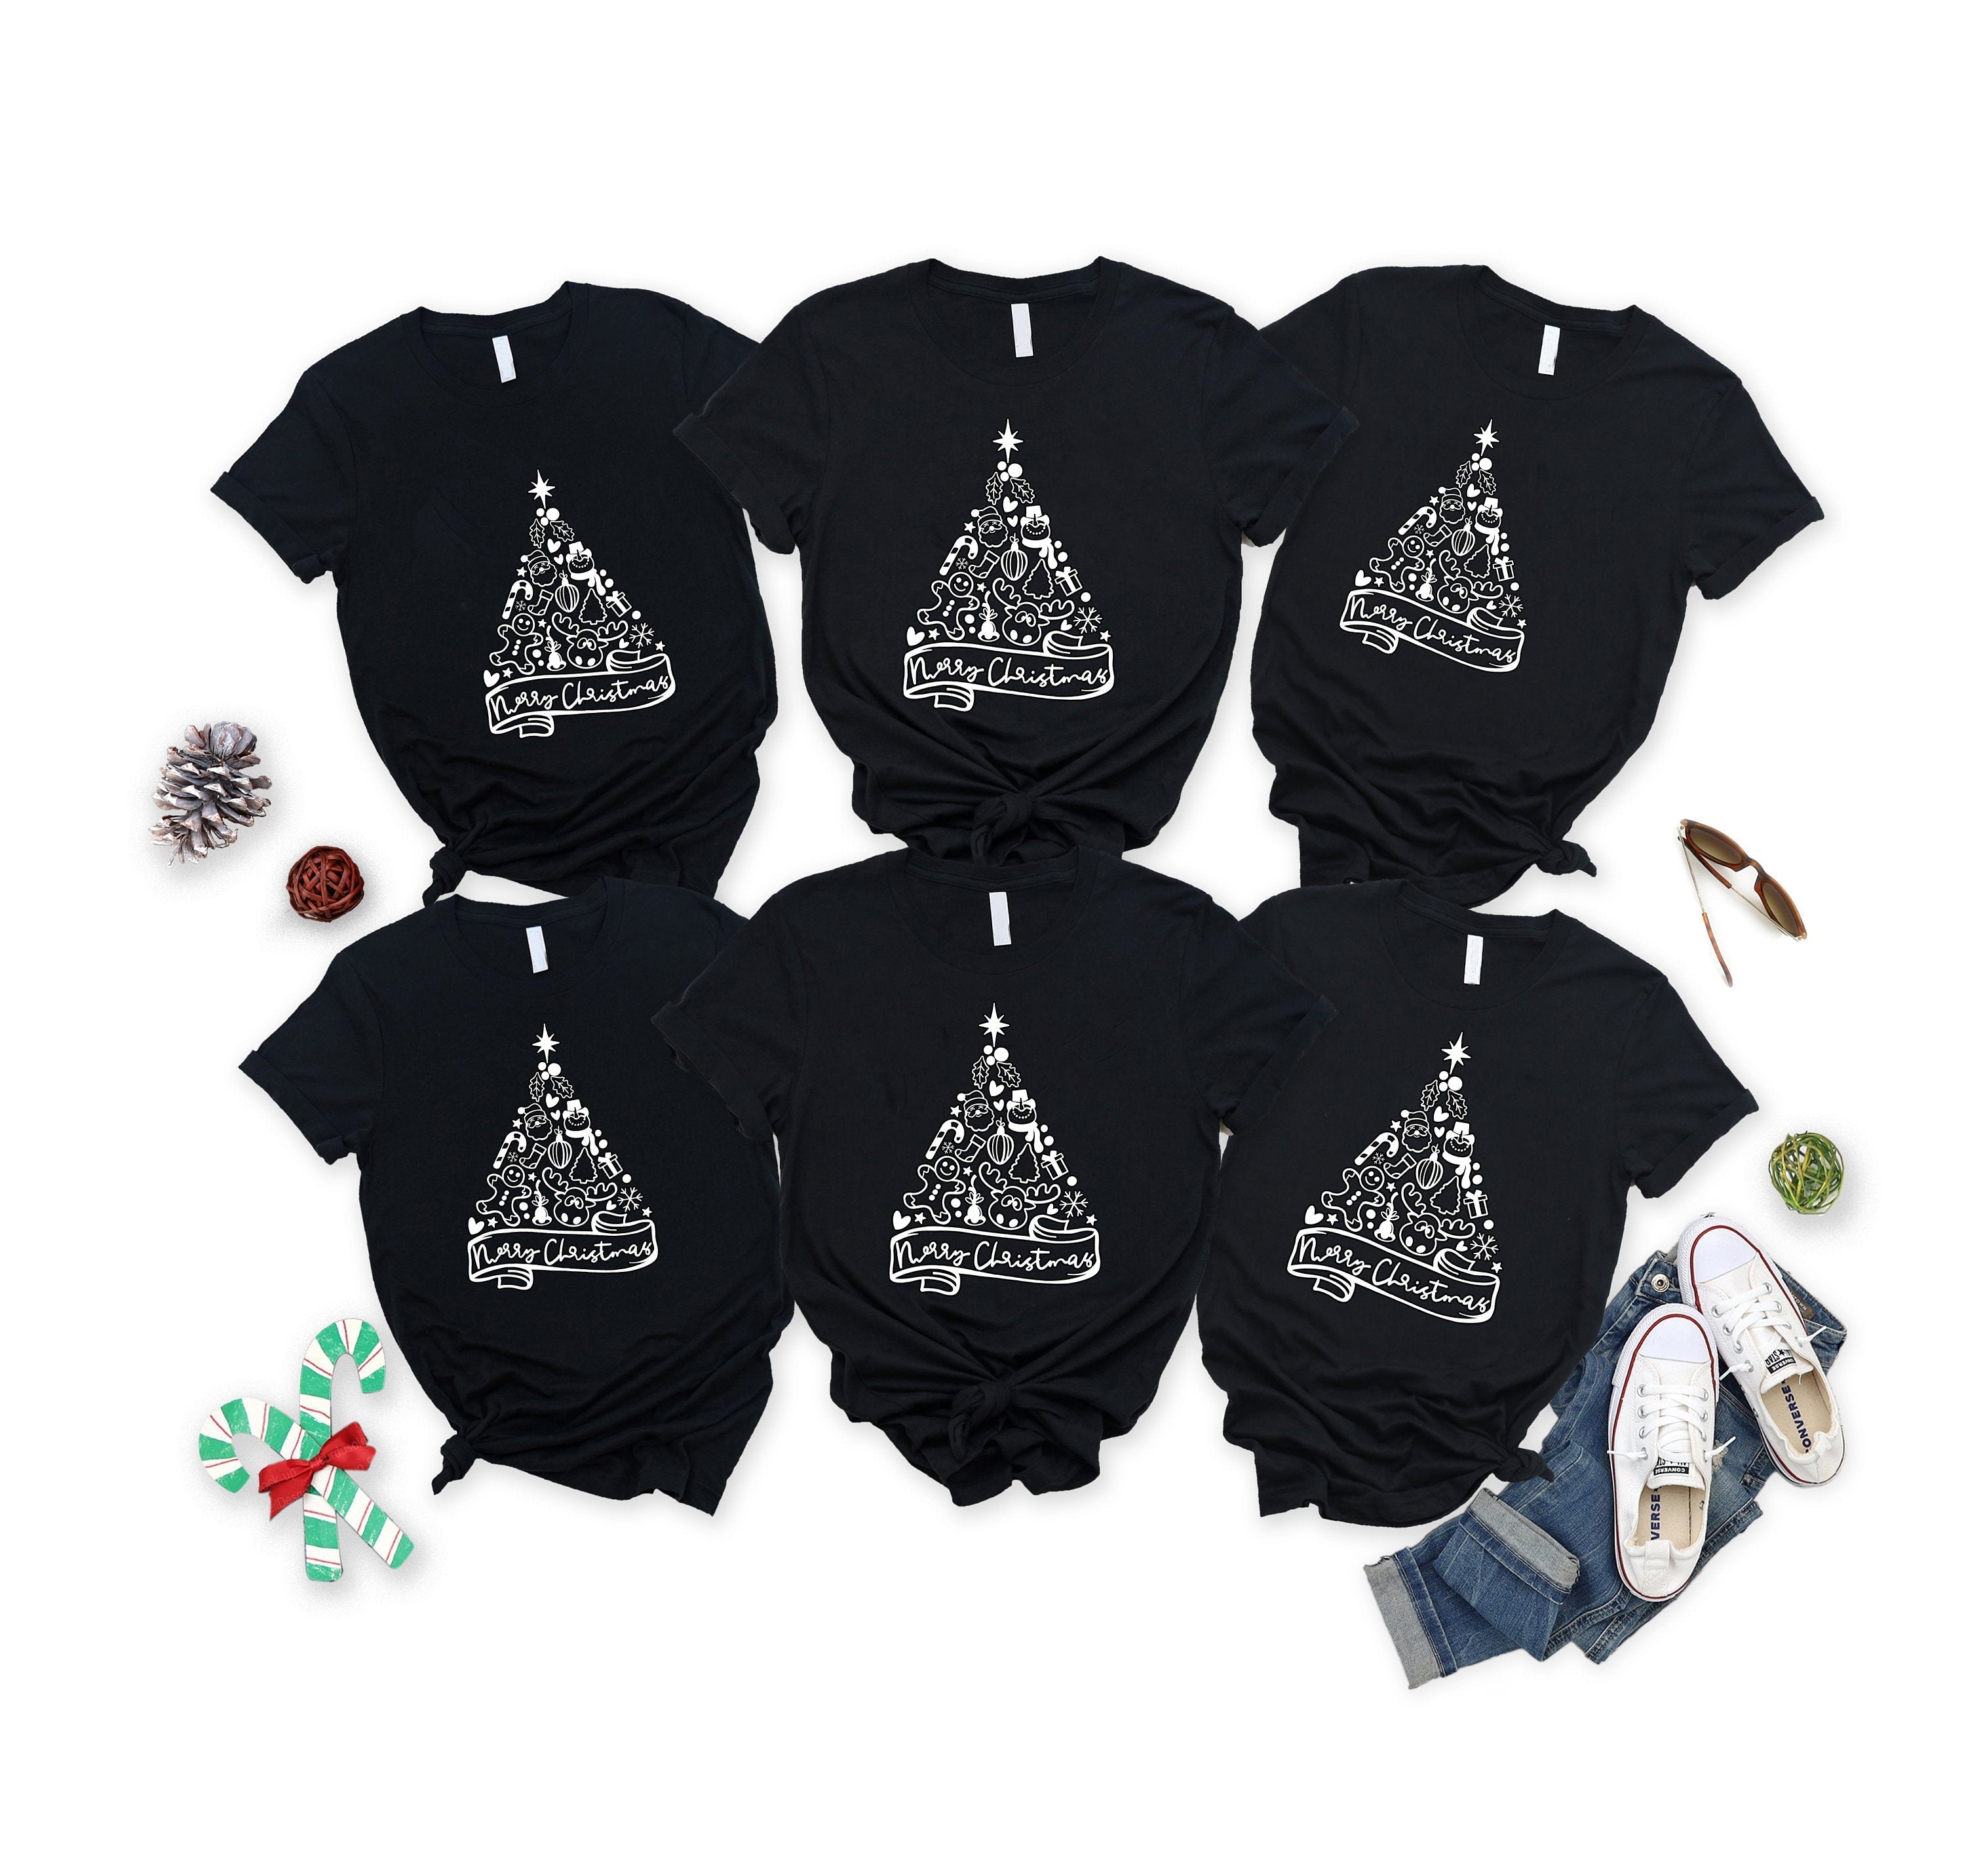 'Merry Chirstmas' And Gift-wrapped Christmas Tree Pattern Family Christmas Matching Pajamas Tops Cute Black Short Sleeve T-shirts With Dog Bandana